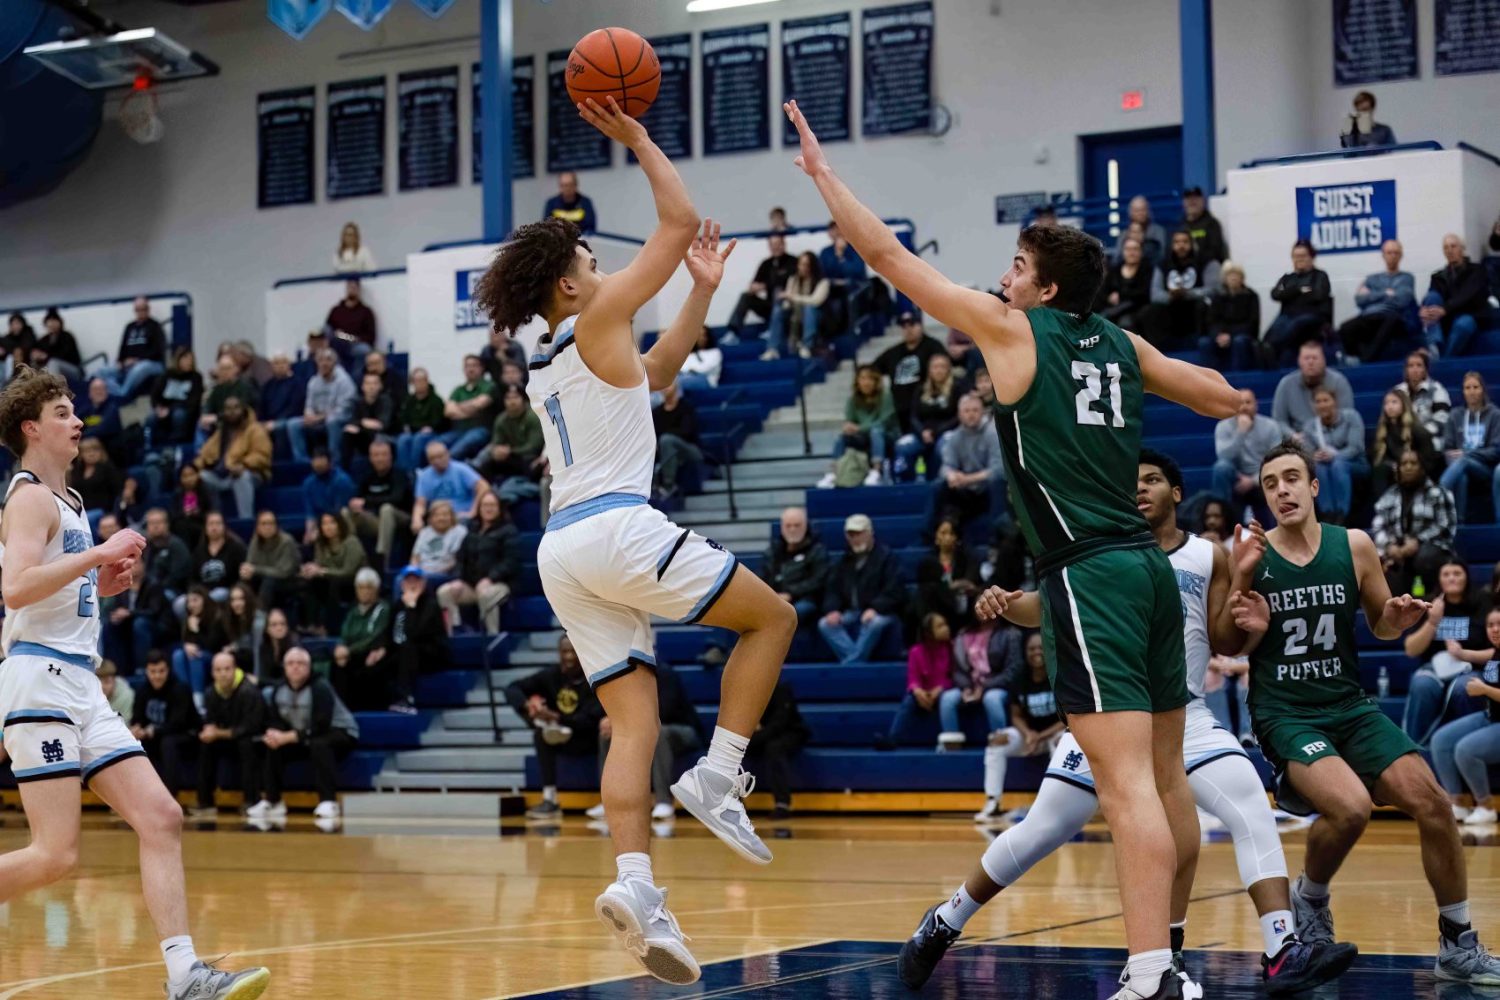 Reeths-Puffer pulls away for a boys basketball victory over rival Mona Shores